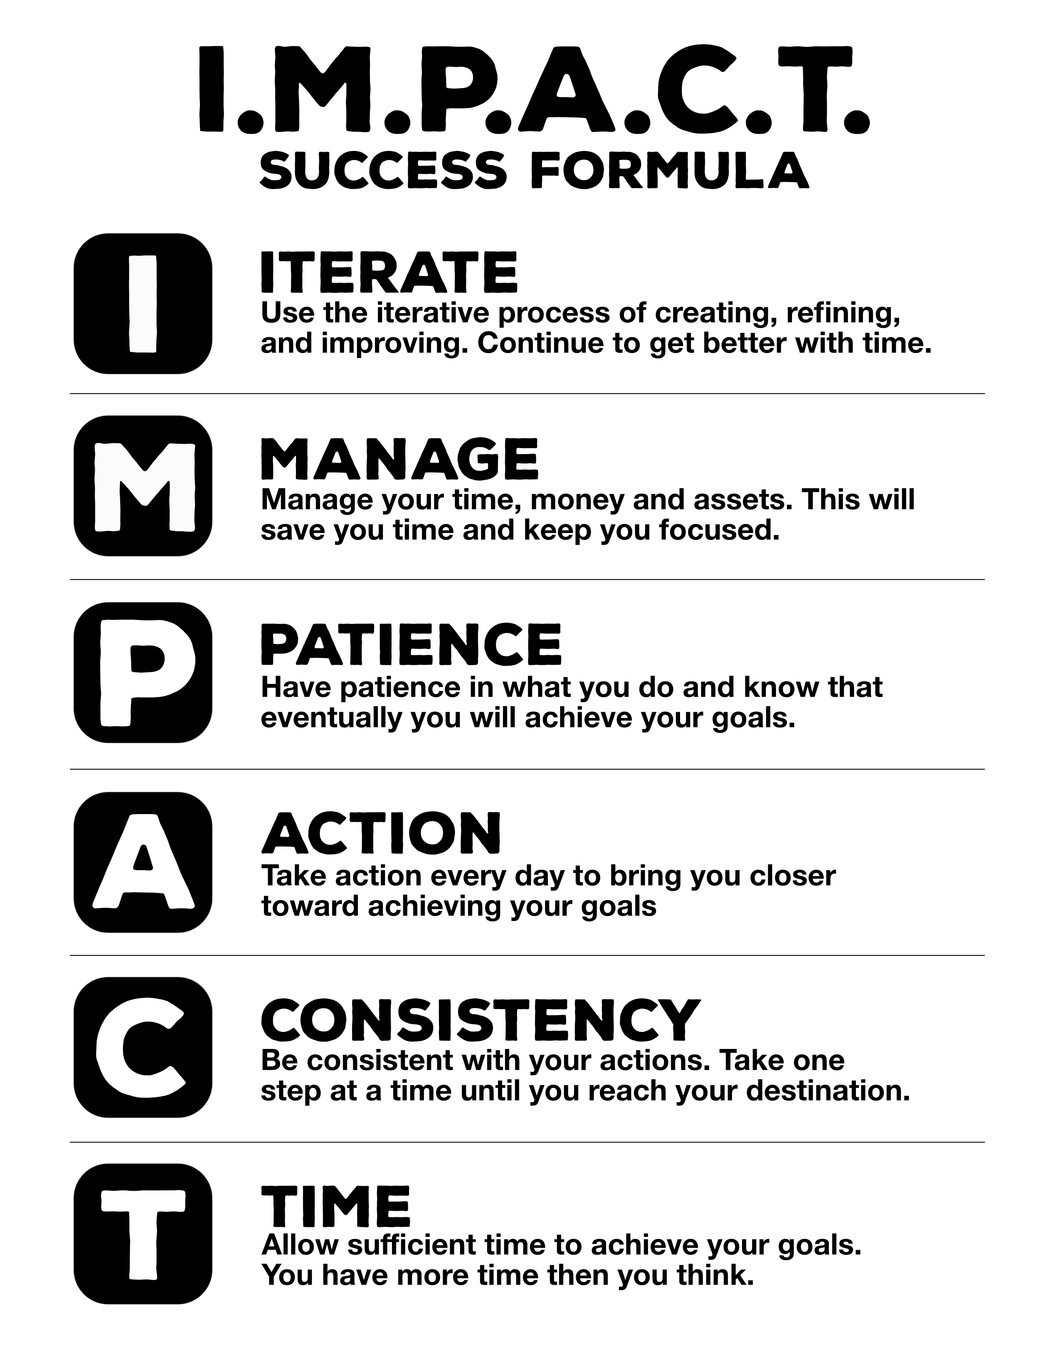 A Formula to Better Manage Your Time